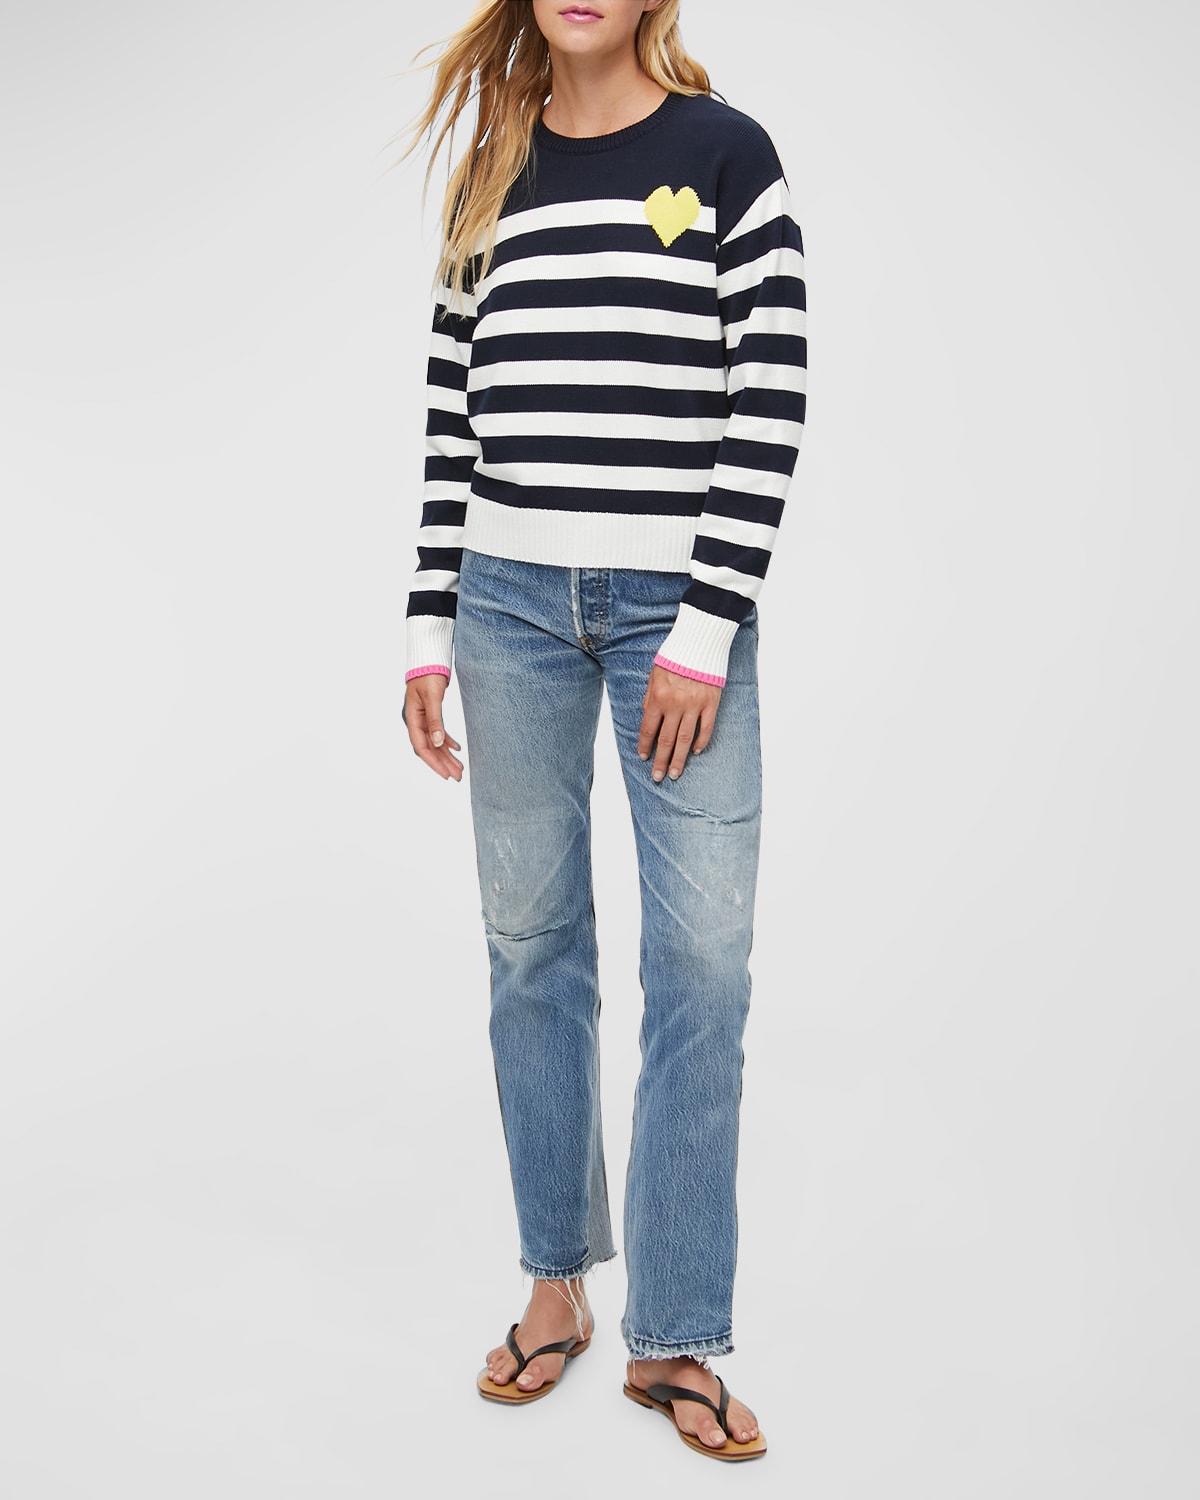 Michael Stars Cotton Knit Pullover In Admiral/yellow